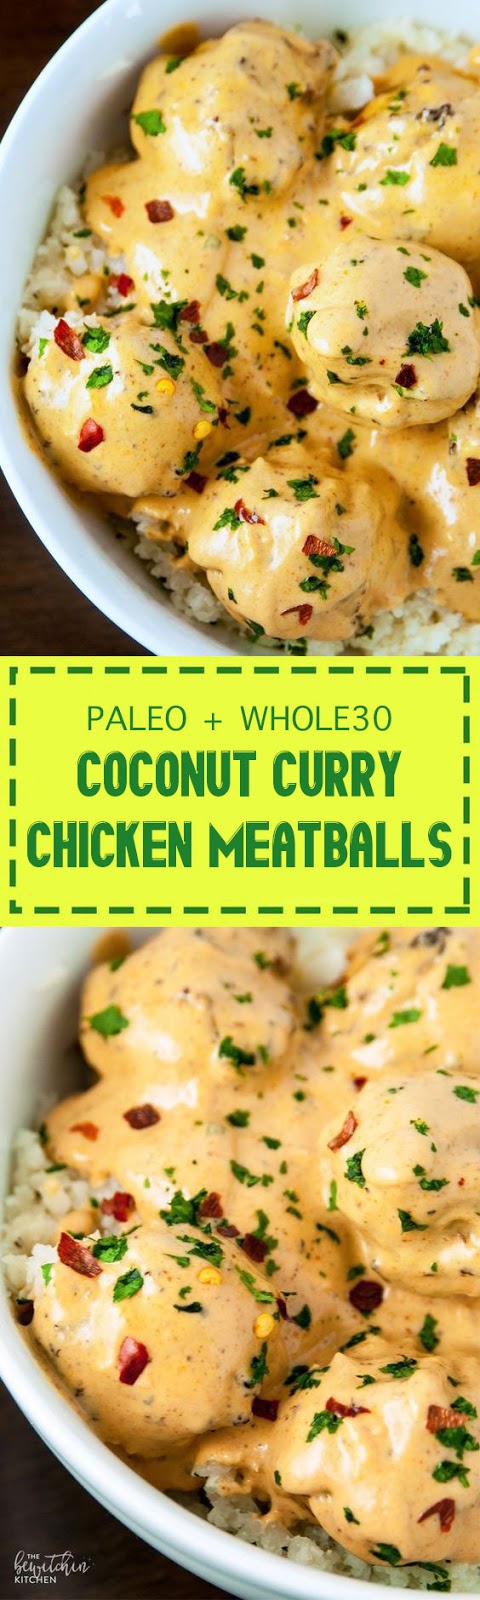 Paleo + Whole30 Coconut Curry Chicken Meatballs